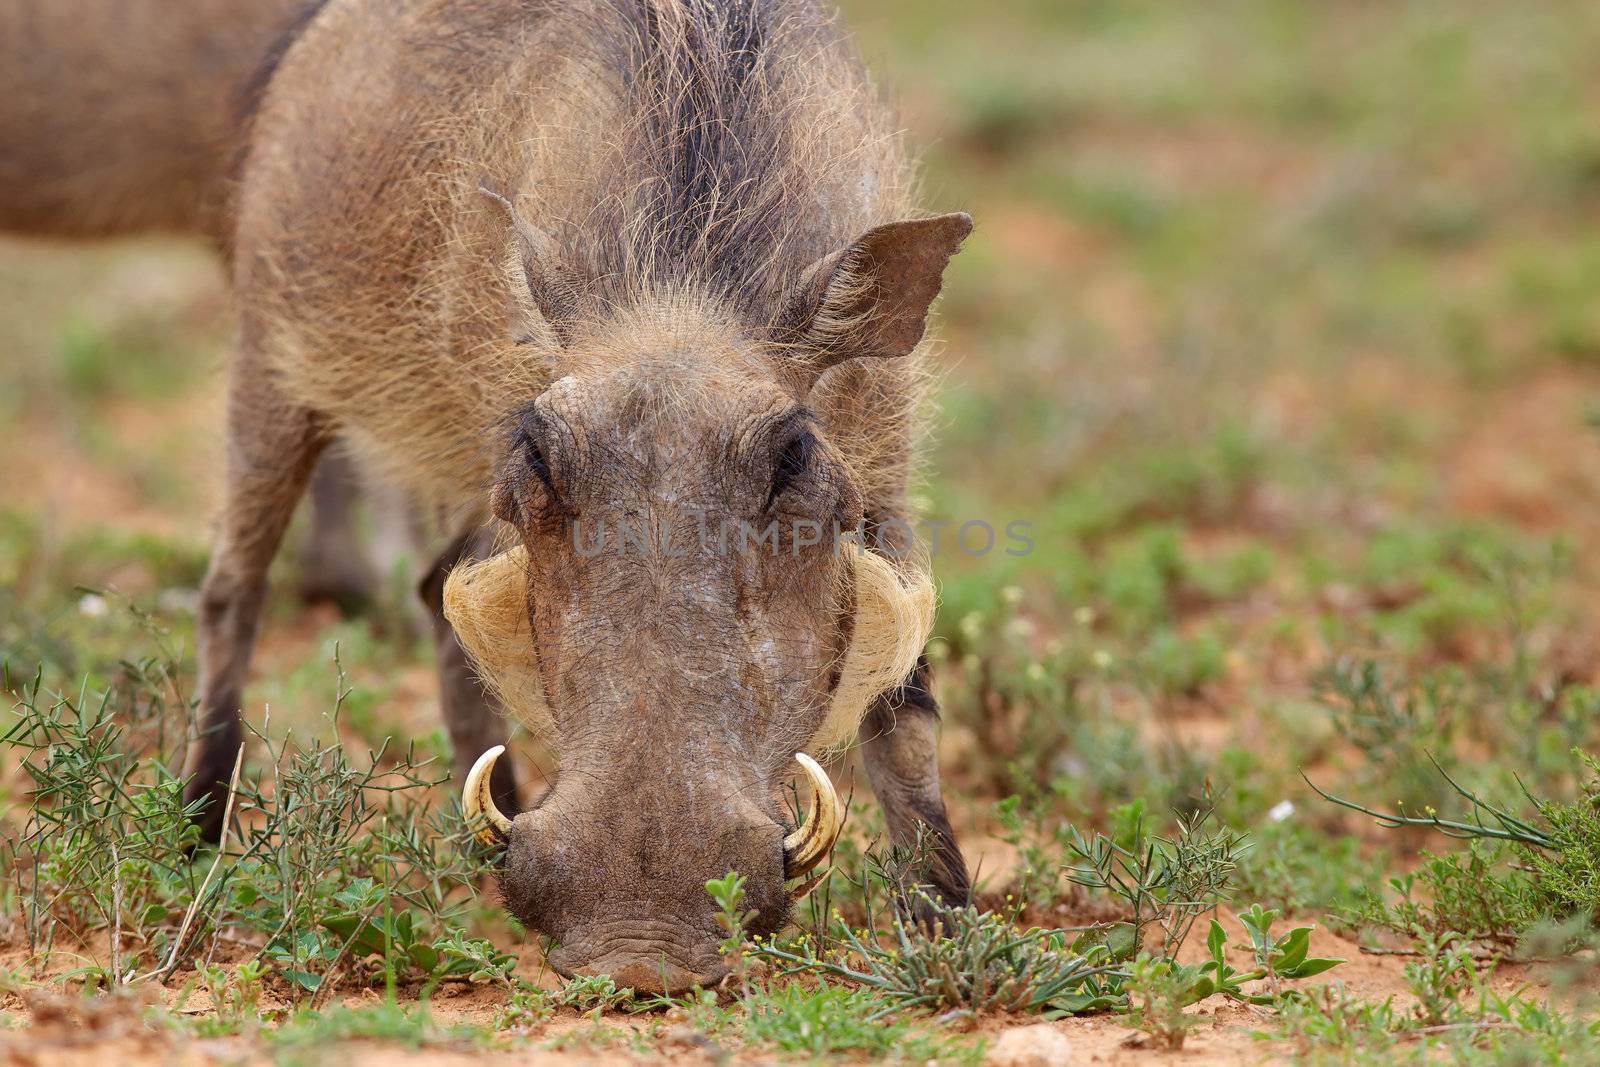 A warthog (Phacochoerus aethiopicus) in the Addo Elephant National Park, South Africa.